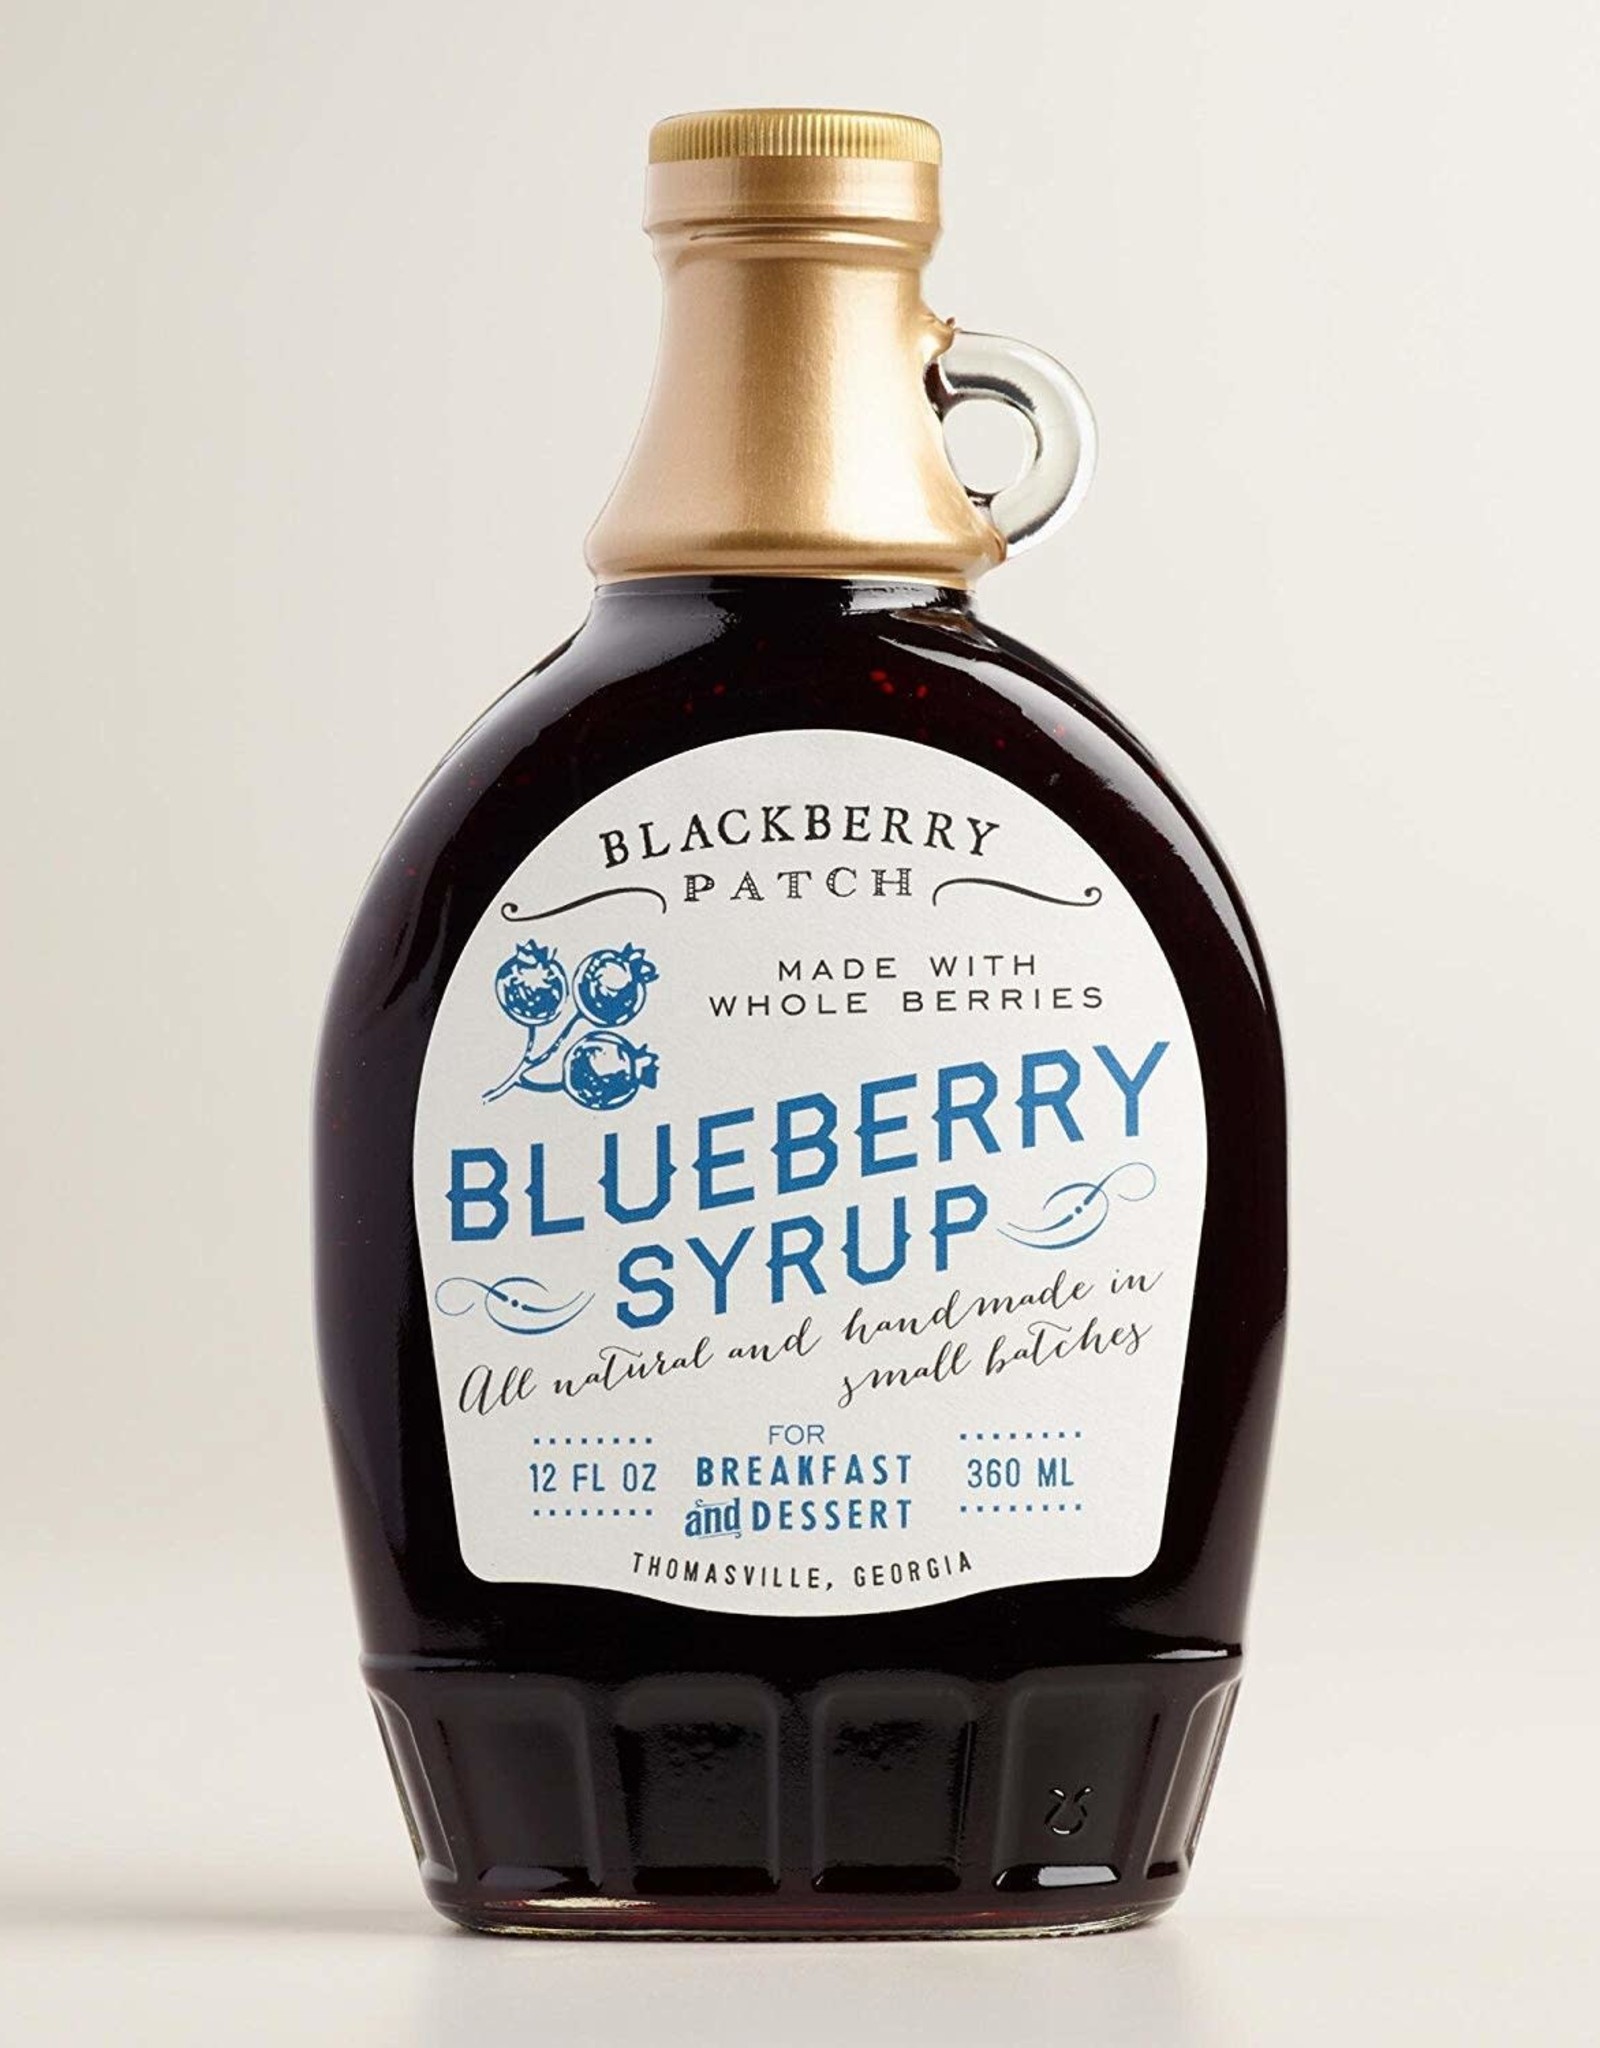 Food & Beverage Blackberry Patch - Blueberry Syrup